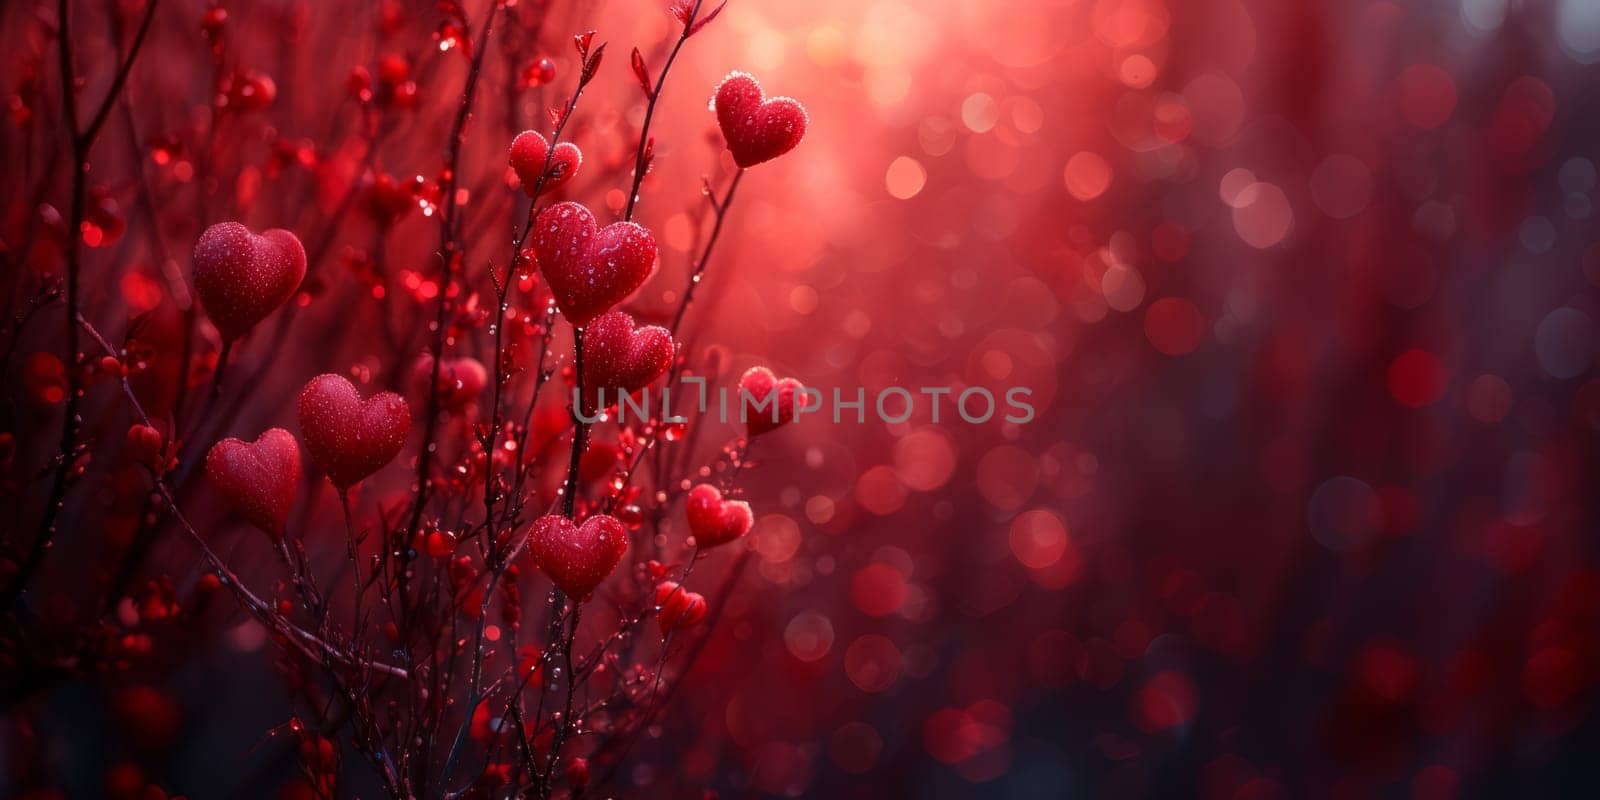 Red bush with hearts on branches valentine's day style in 4k